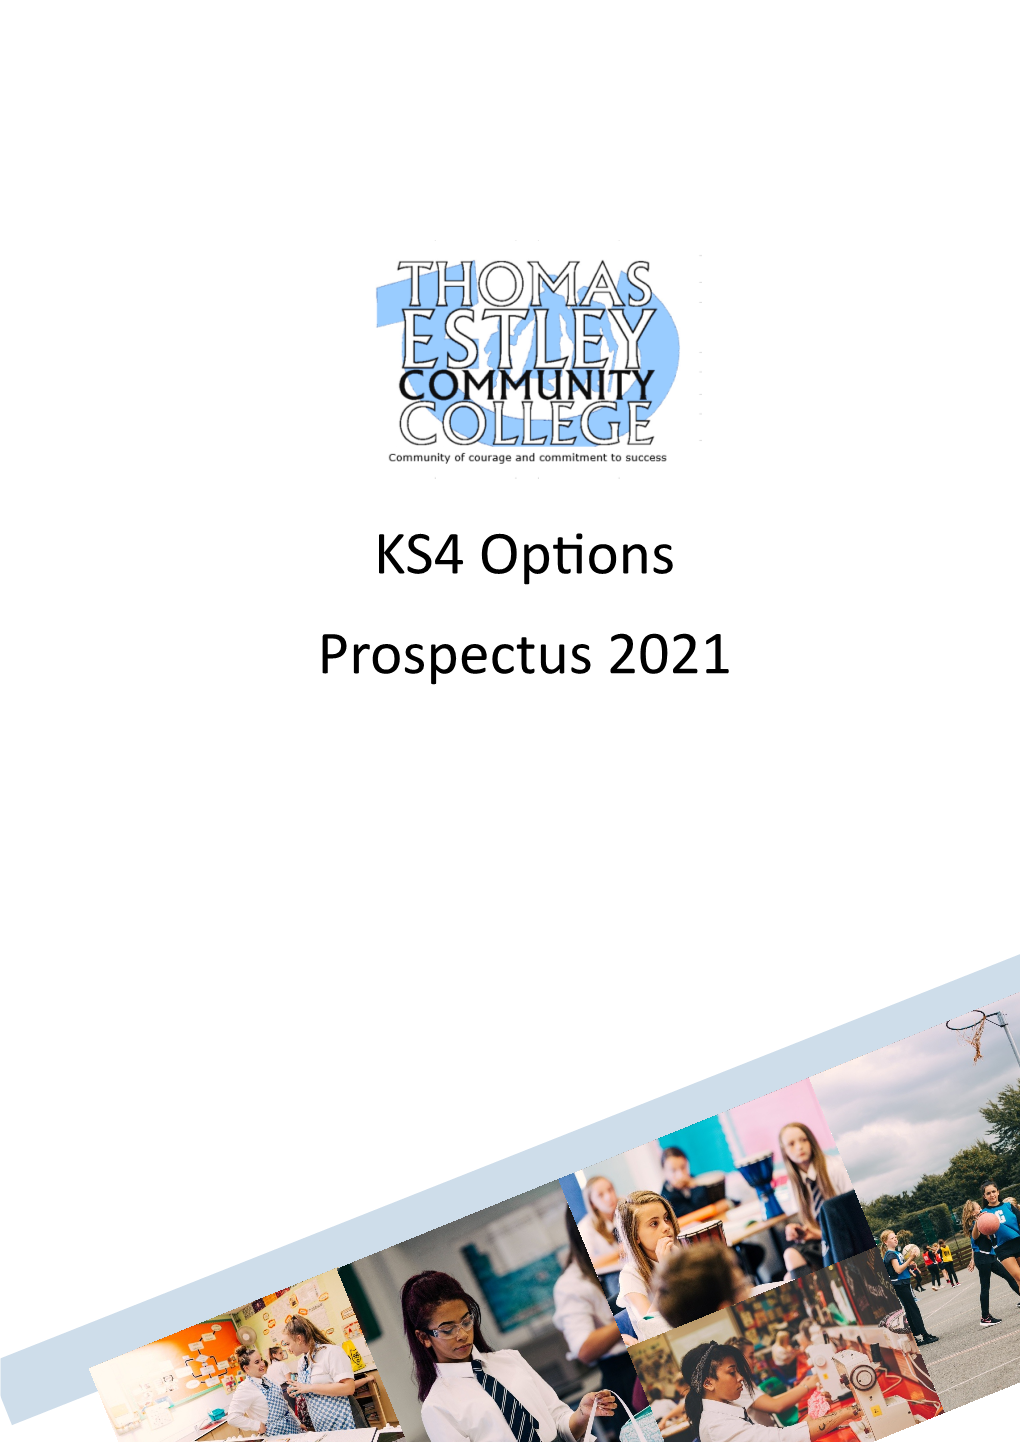 KS4 Options Prospectus 2021 Community of Courage and Commitment to Success